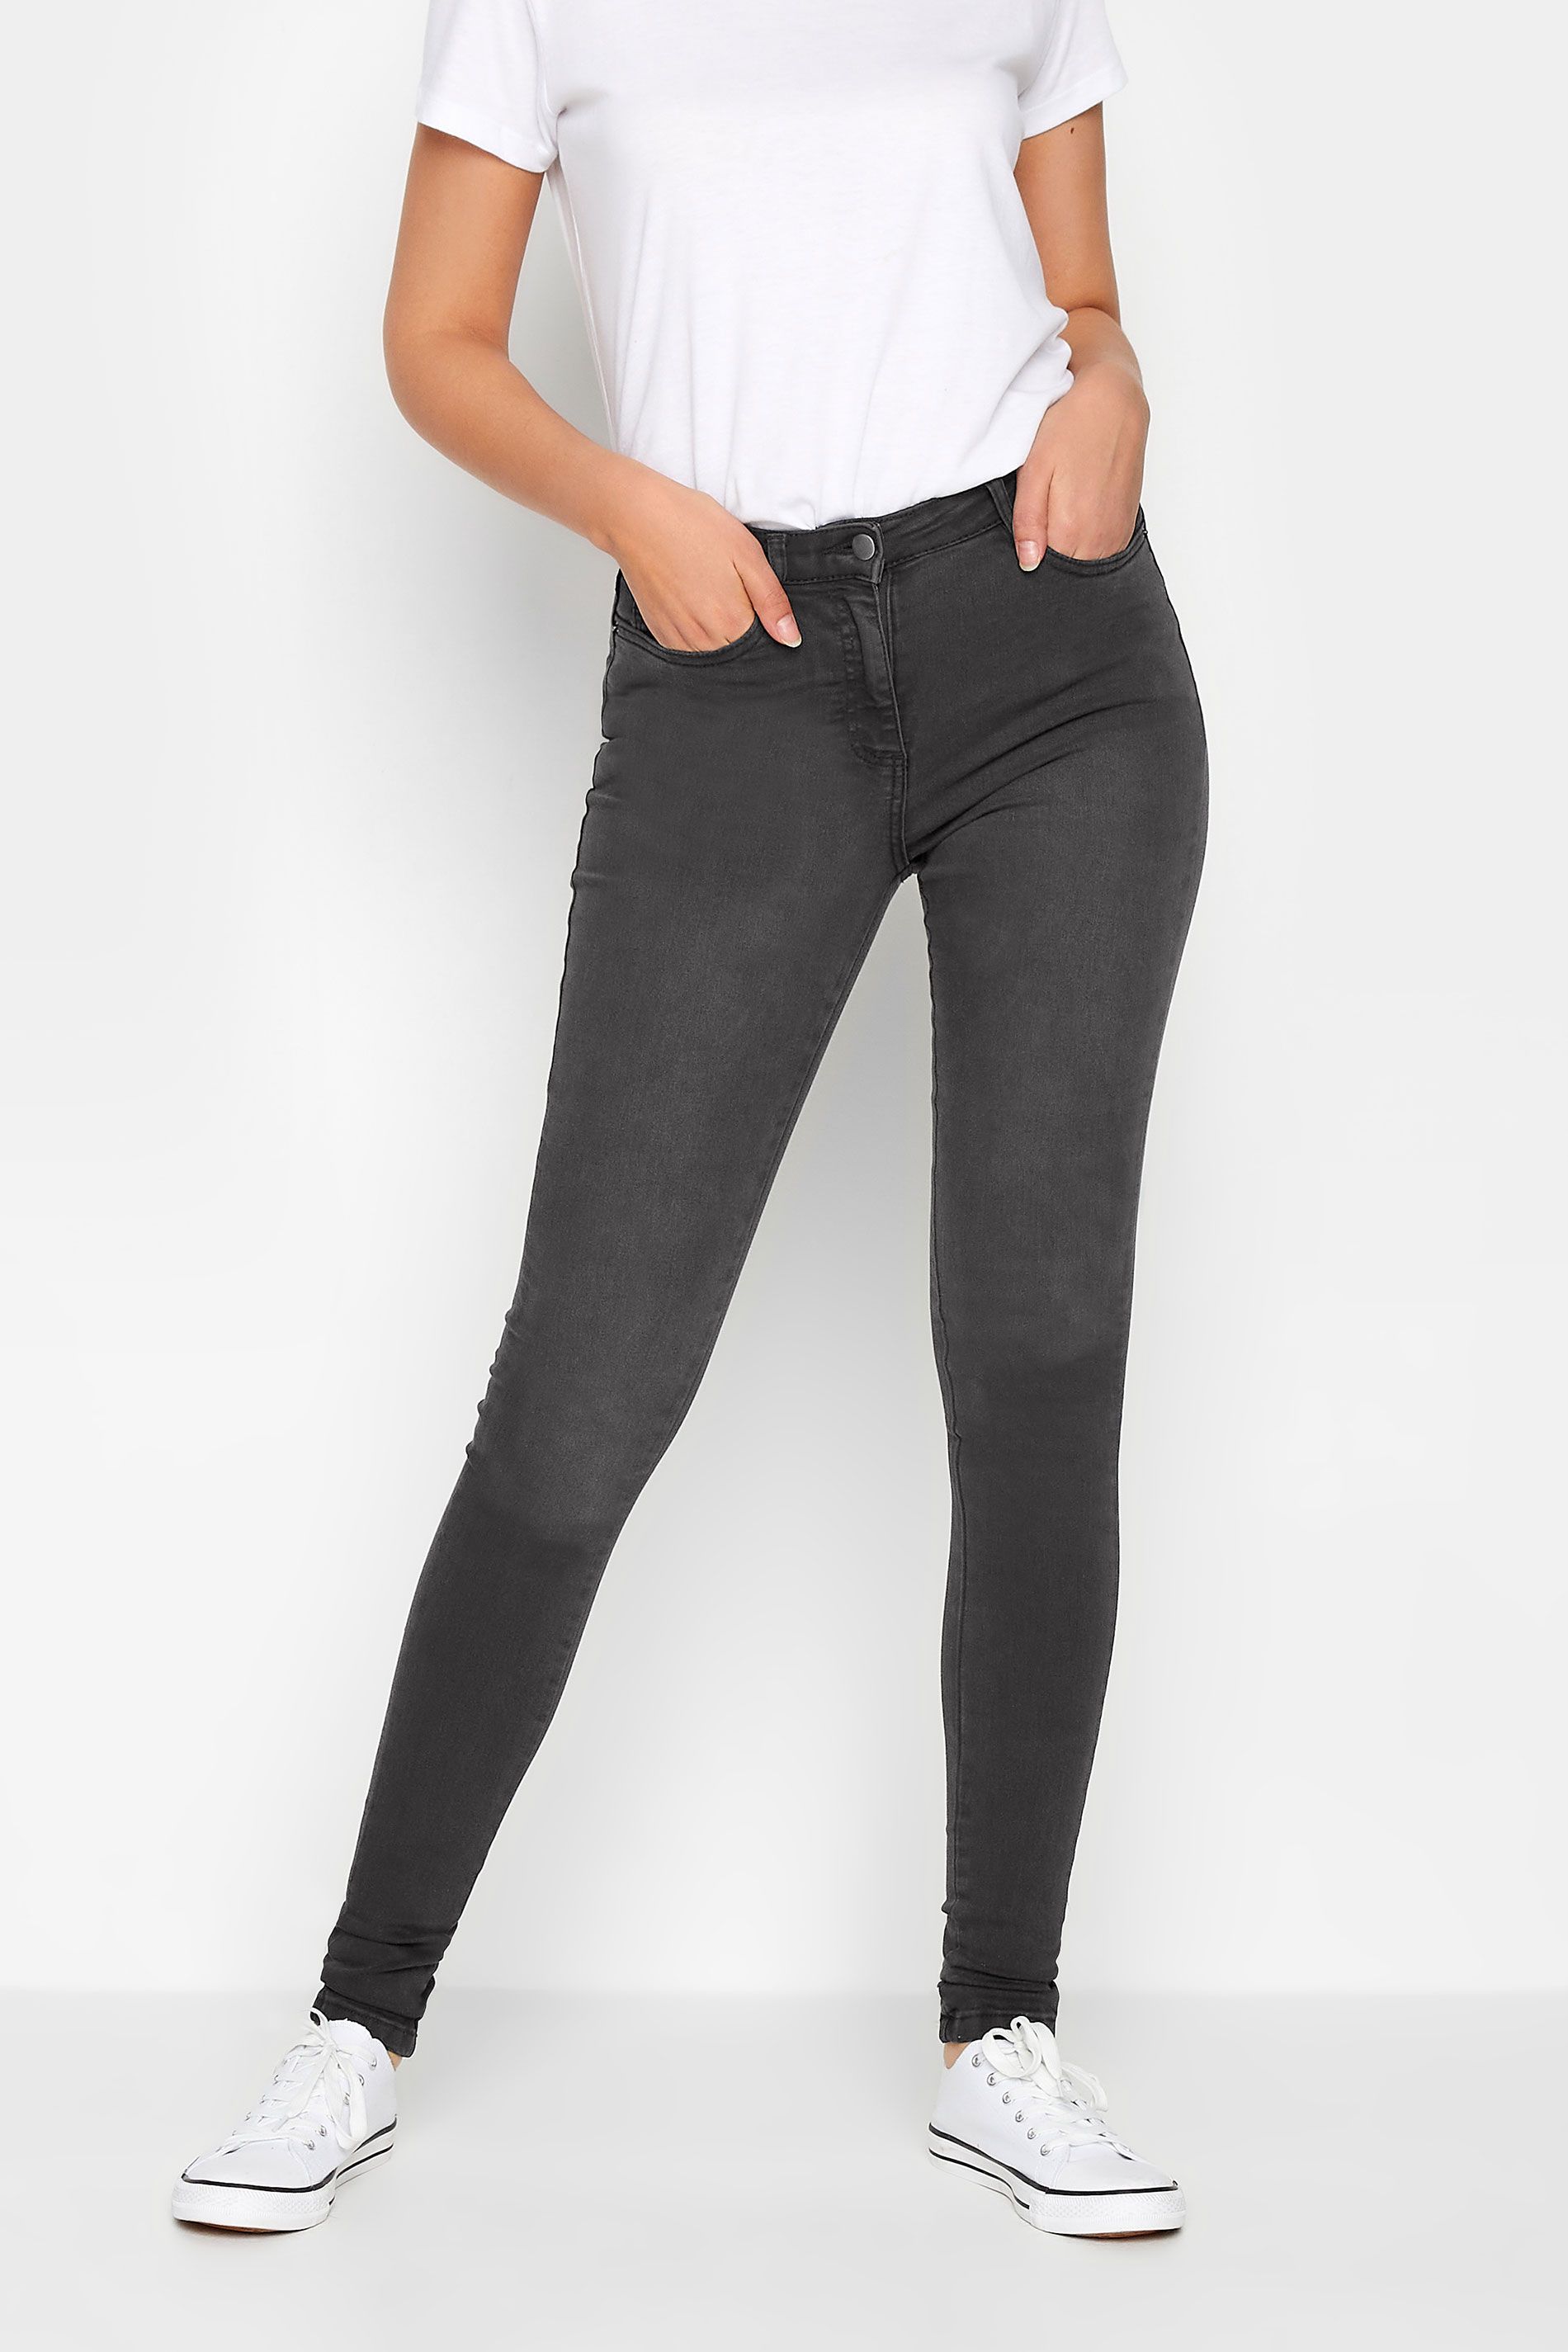 LTS Tall Black Washed AVA Stretch Skinny Jeans | Long Tall Sally